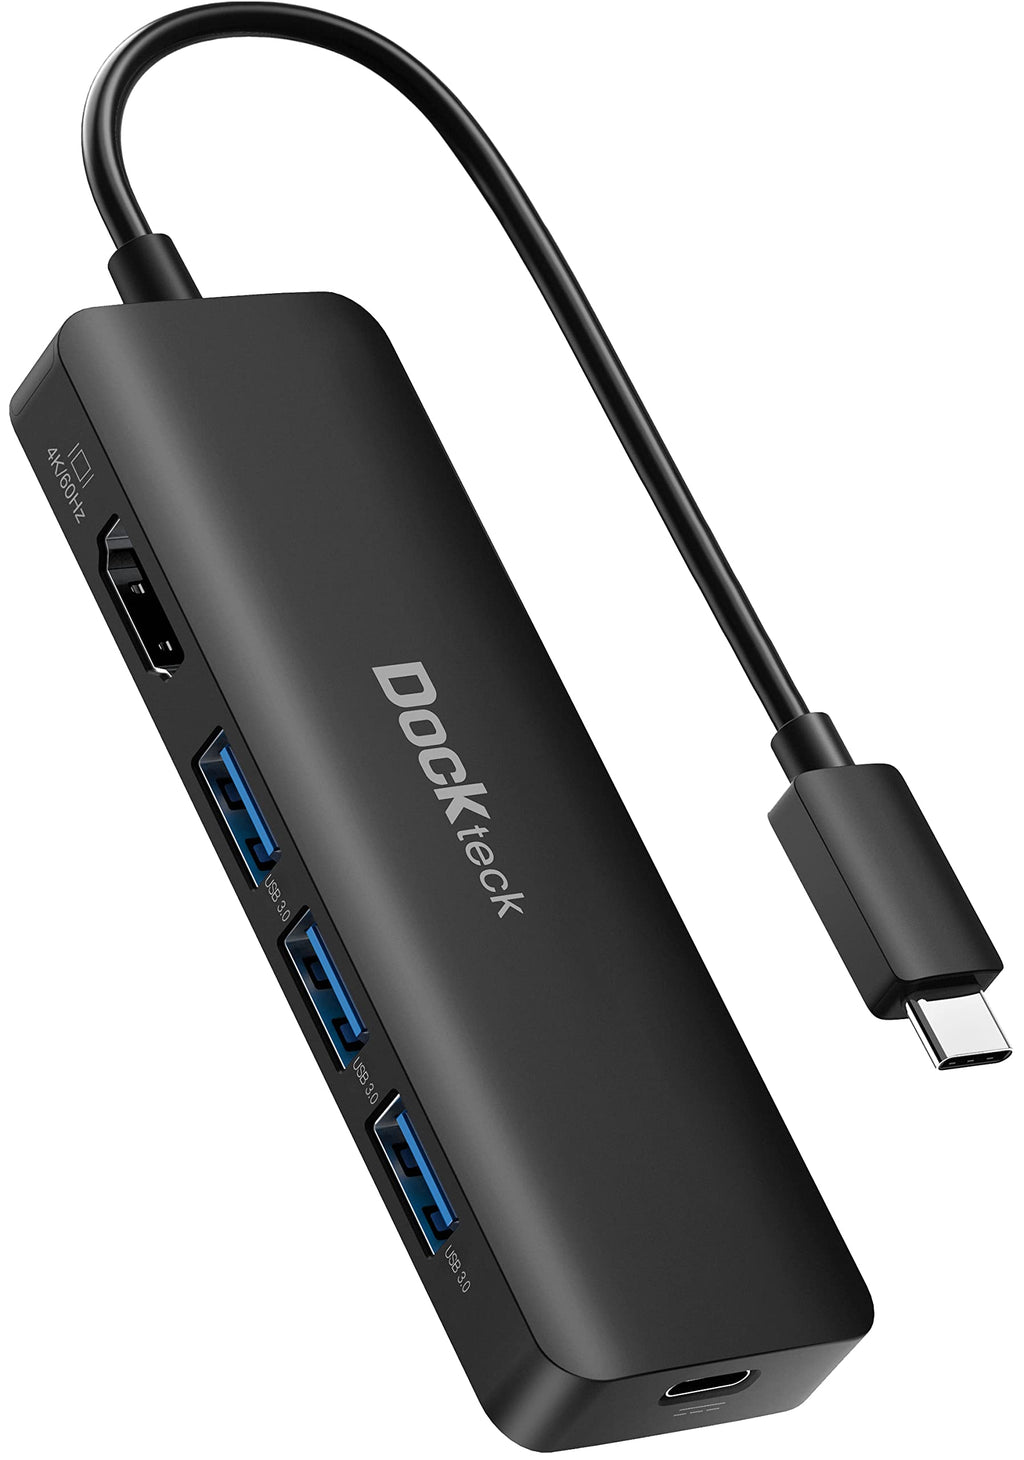  [AUSTRALIA] - USB C HUB 4K 60Hz, Dockteck USB-C Multiport Adapter 5-in-1 with 4K HDMI, 100W Power Delivery, 3 USB 3.0 Data Port for MacBook Pro/Air M1 2020, iPad Pro 2021, iPad Mini 6, Surface Pro and More